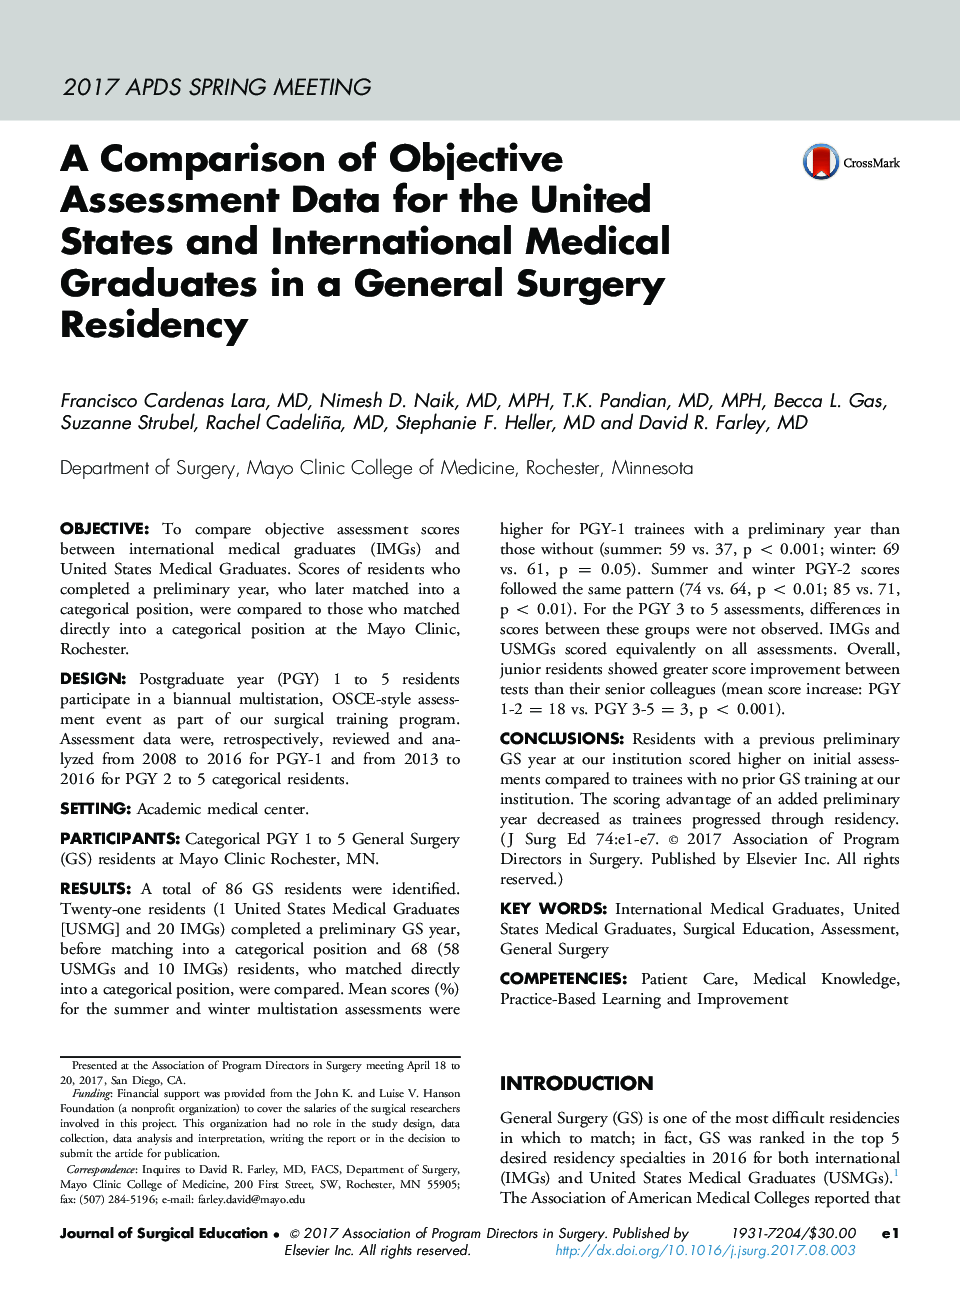 A Comparison of Objective Assessment Data for the United States and International Medical Graduates in a General Surgery Residency